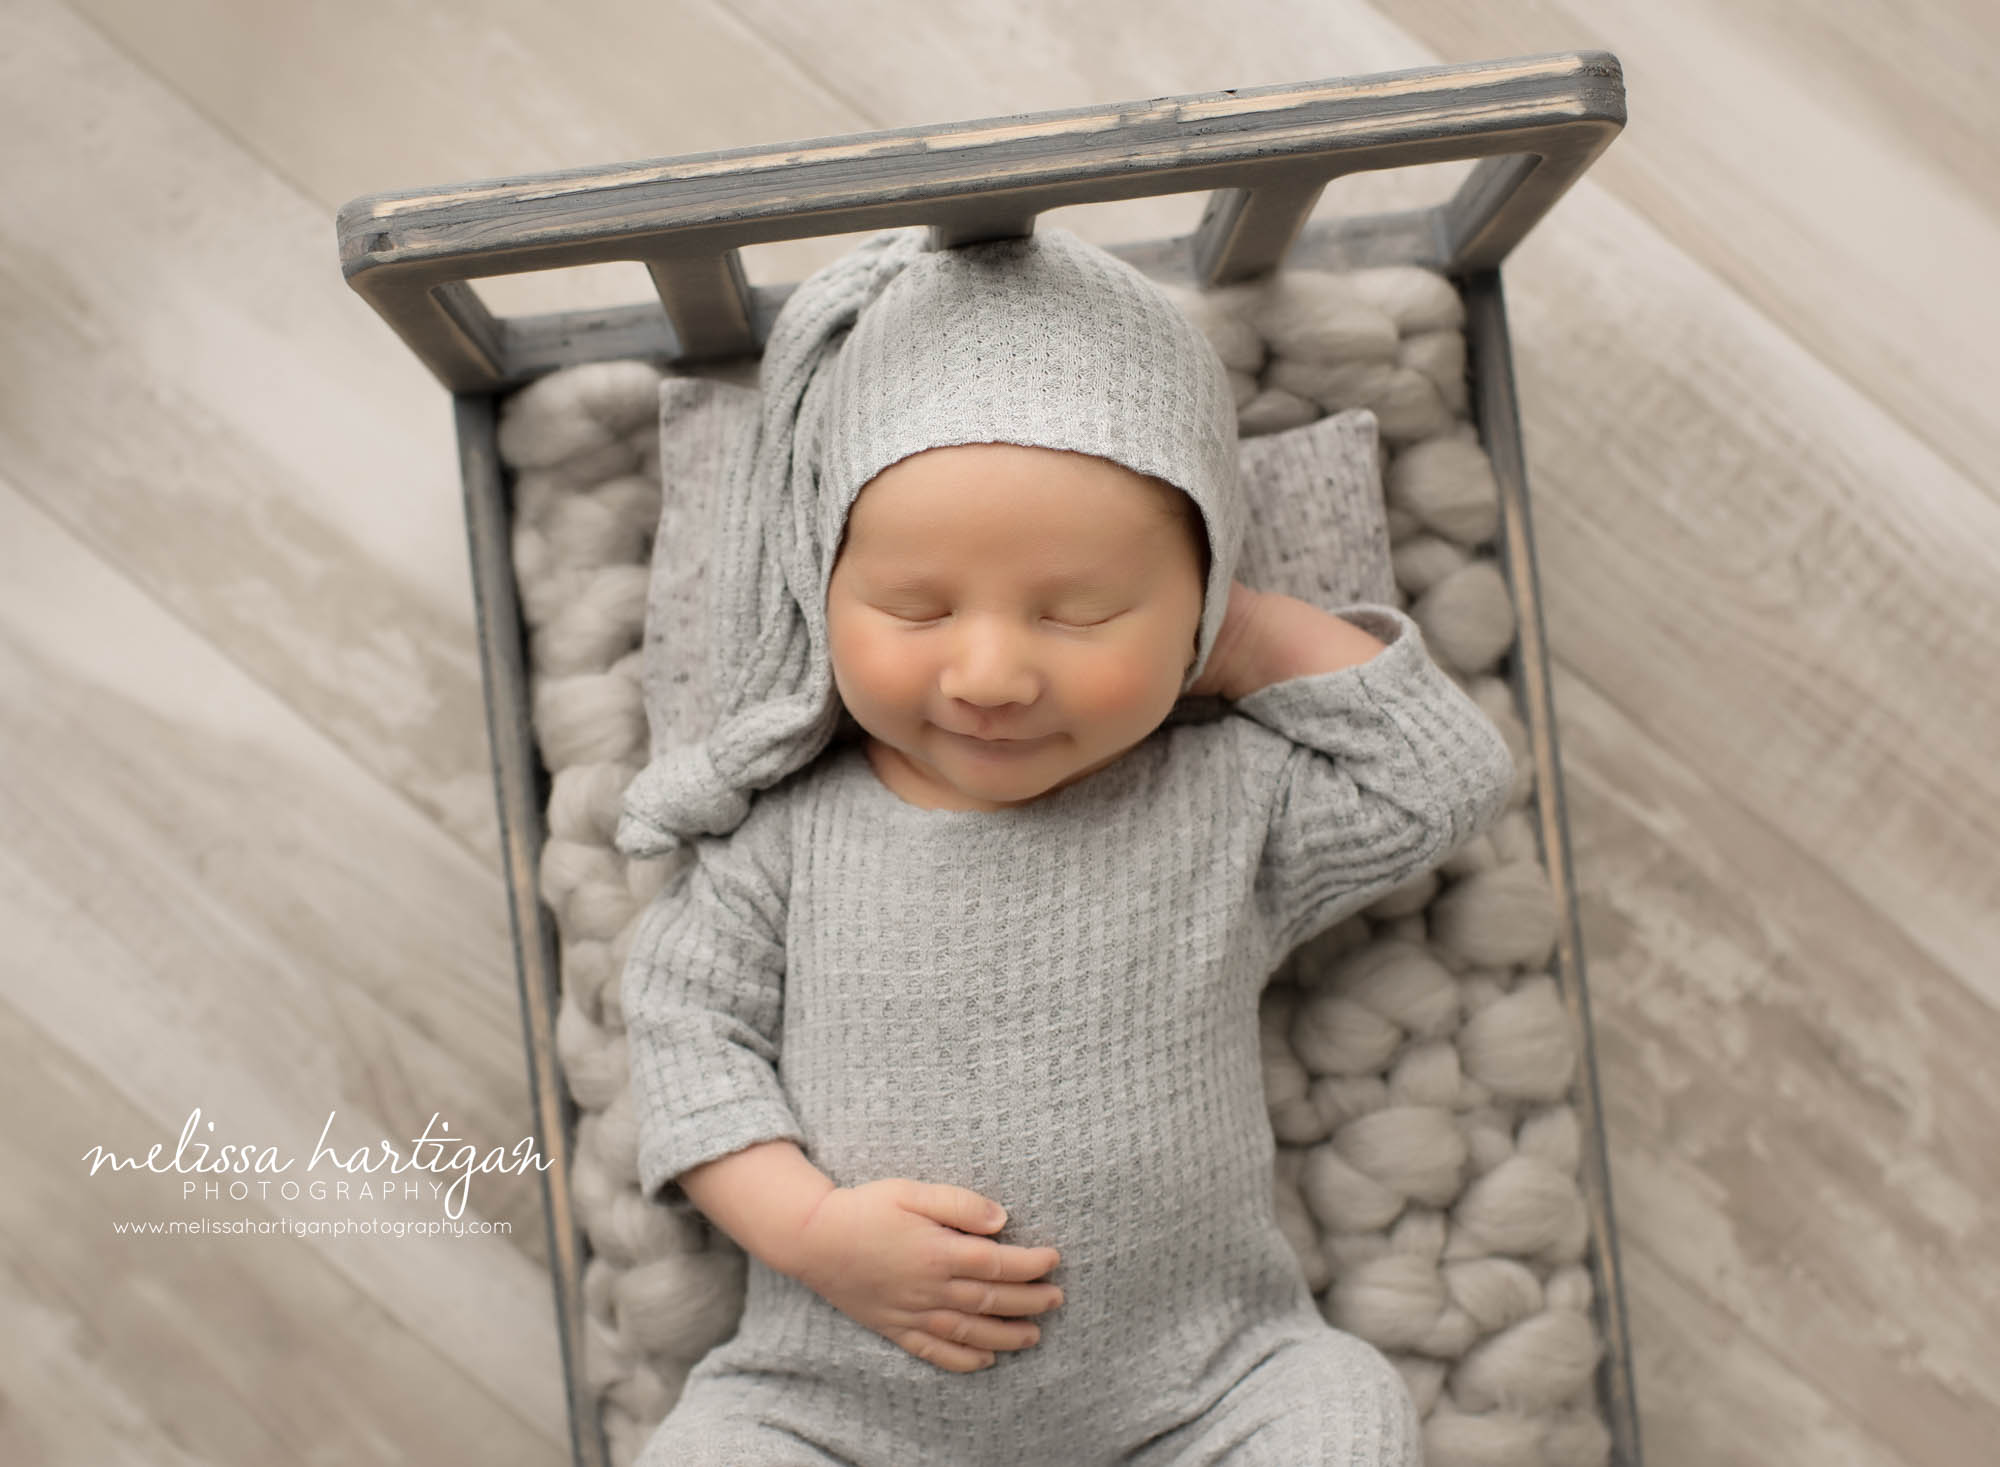 Newborn baby boy posed on back on wooden bed wearing grey waffled outfit and sleepy cap